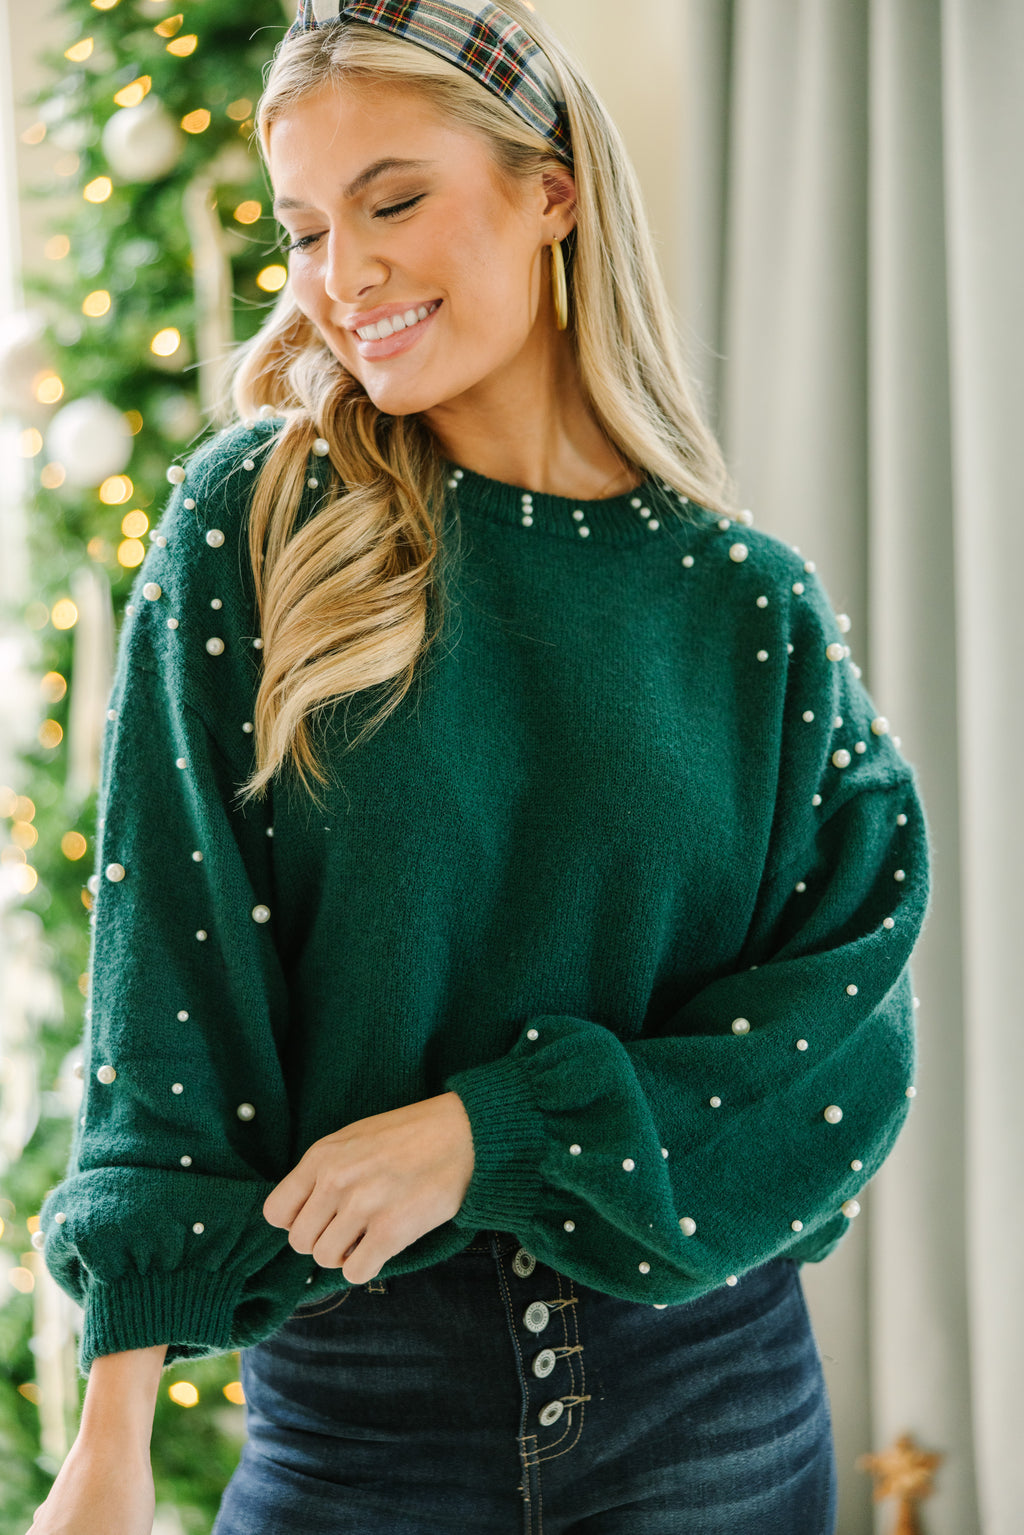 Can't Help But Love Emerald Green Pearl Studded Sweater – Shop the Mint